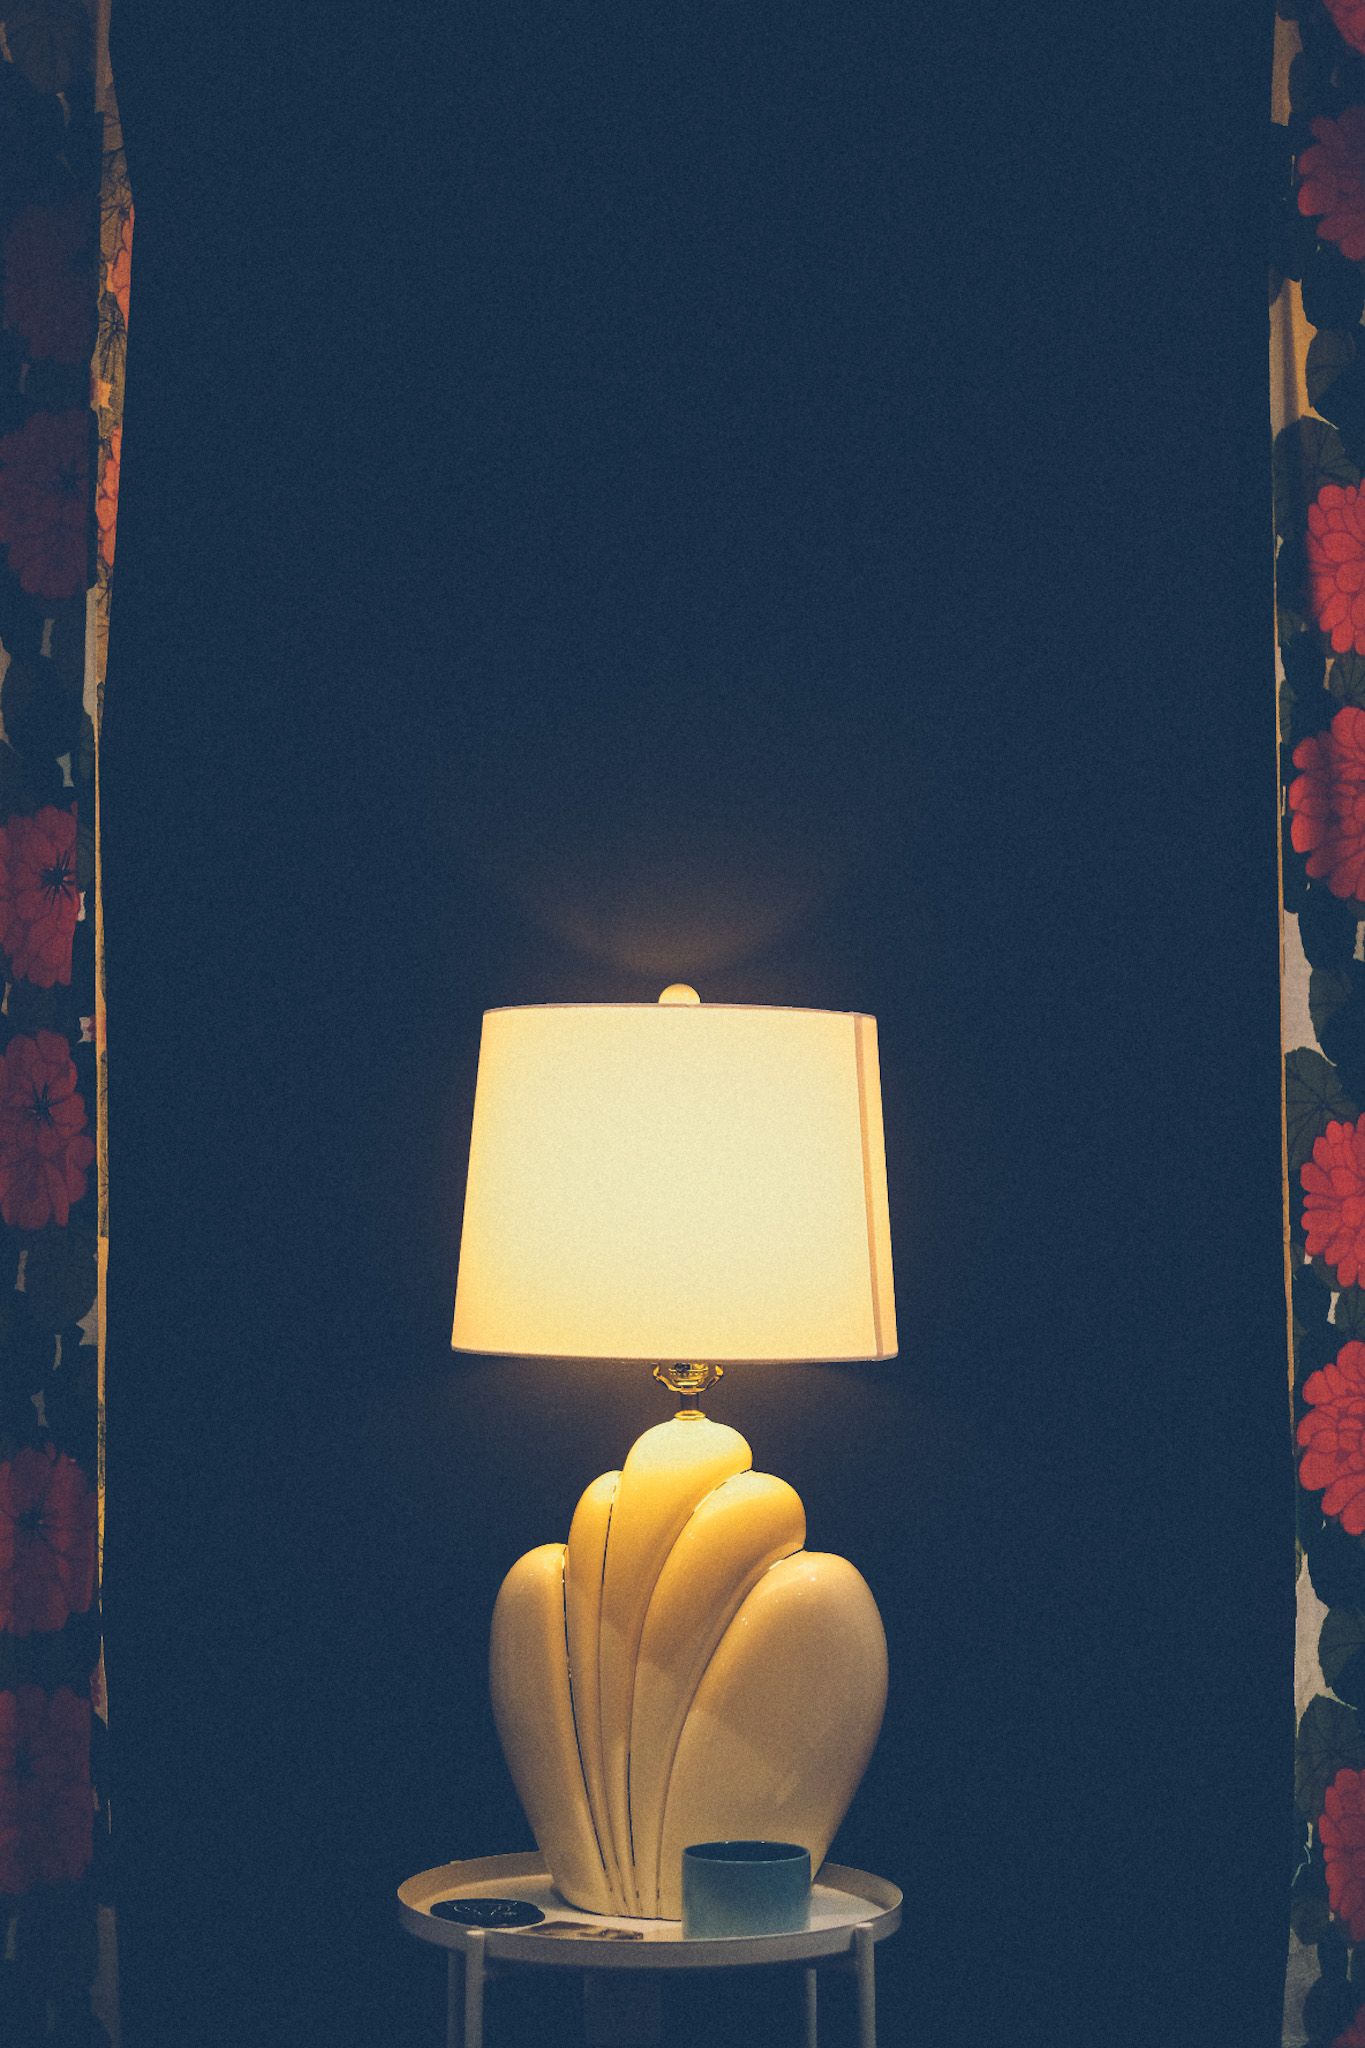 A cream-colored lamp from the 80s sits on a small table against a dark wall, framed by red floral curtains on either side.